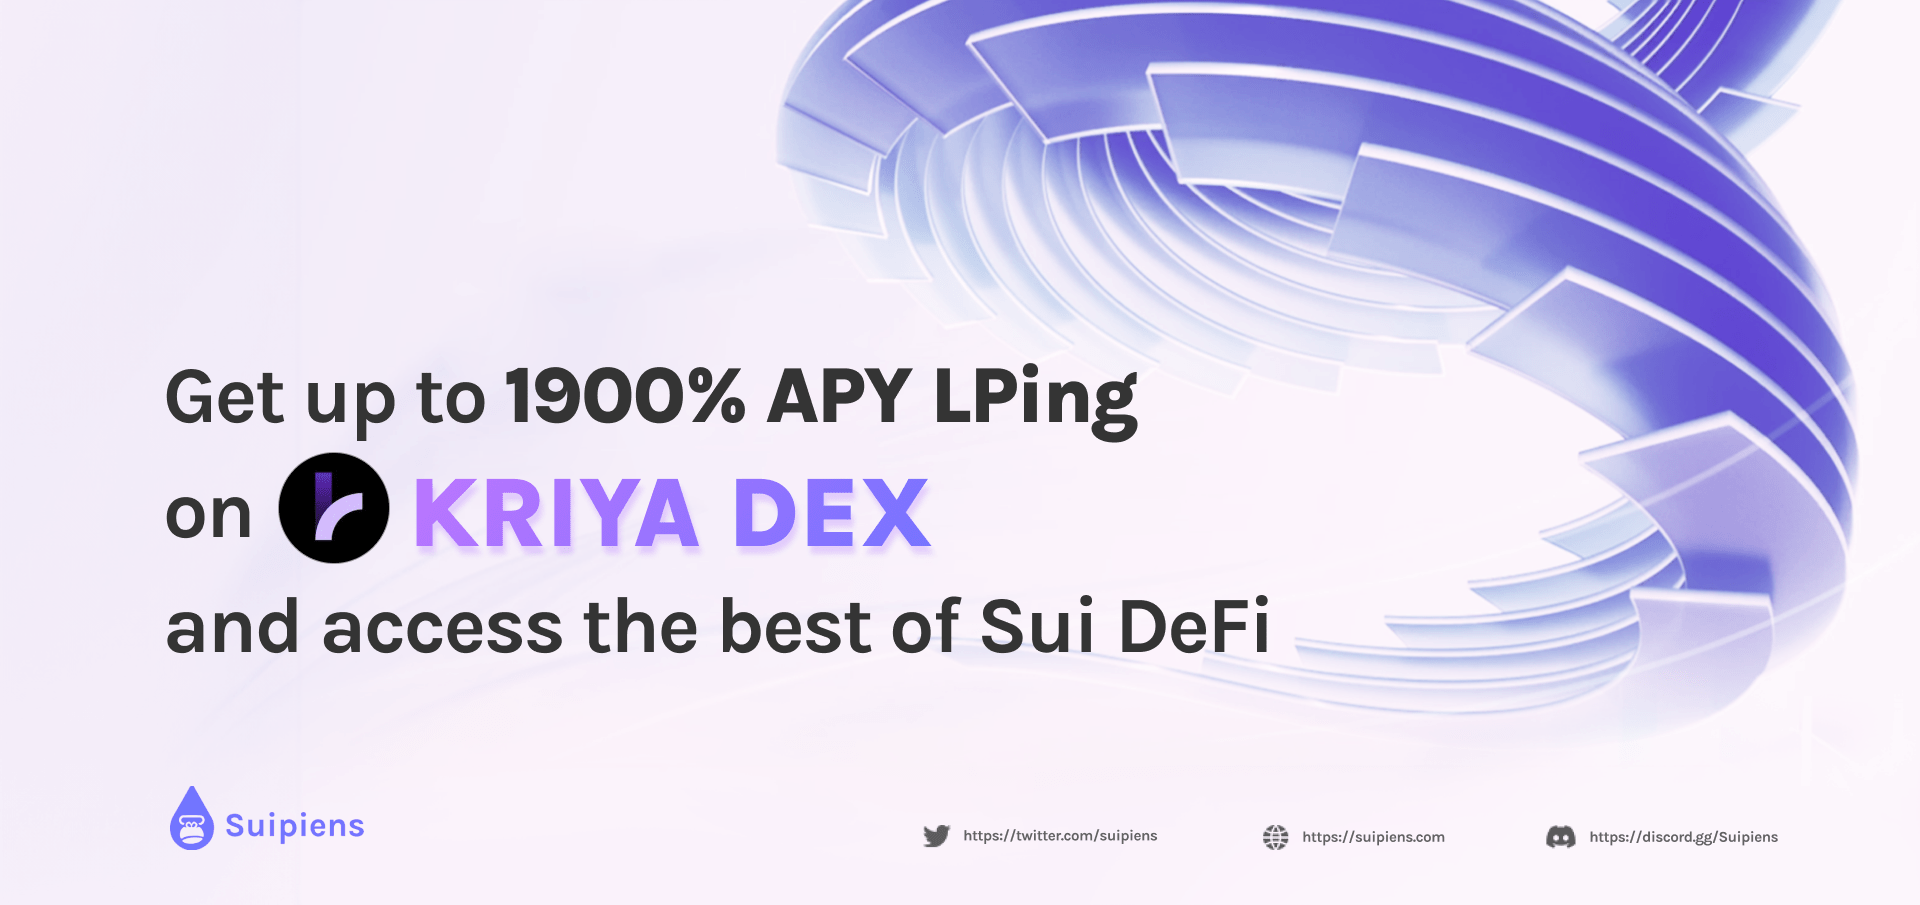 Get up to 1900% APY LPing on KriyaDEX and access the best of Sui DeFi